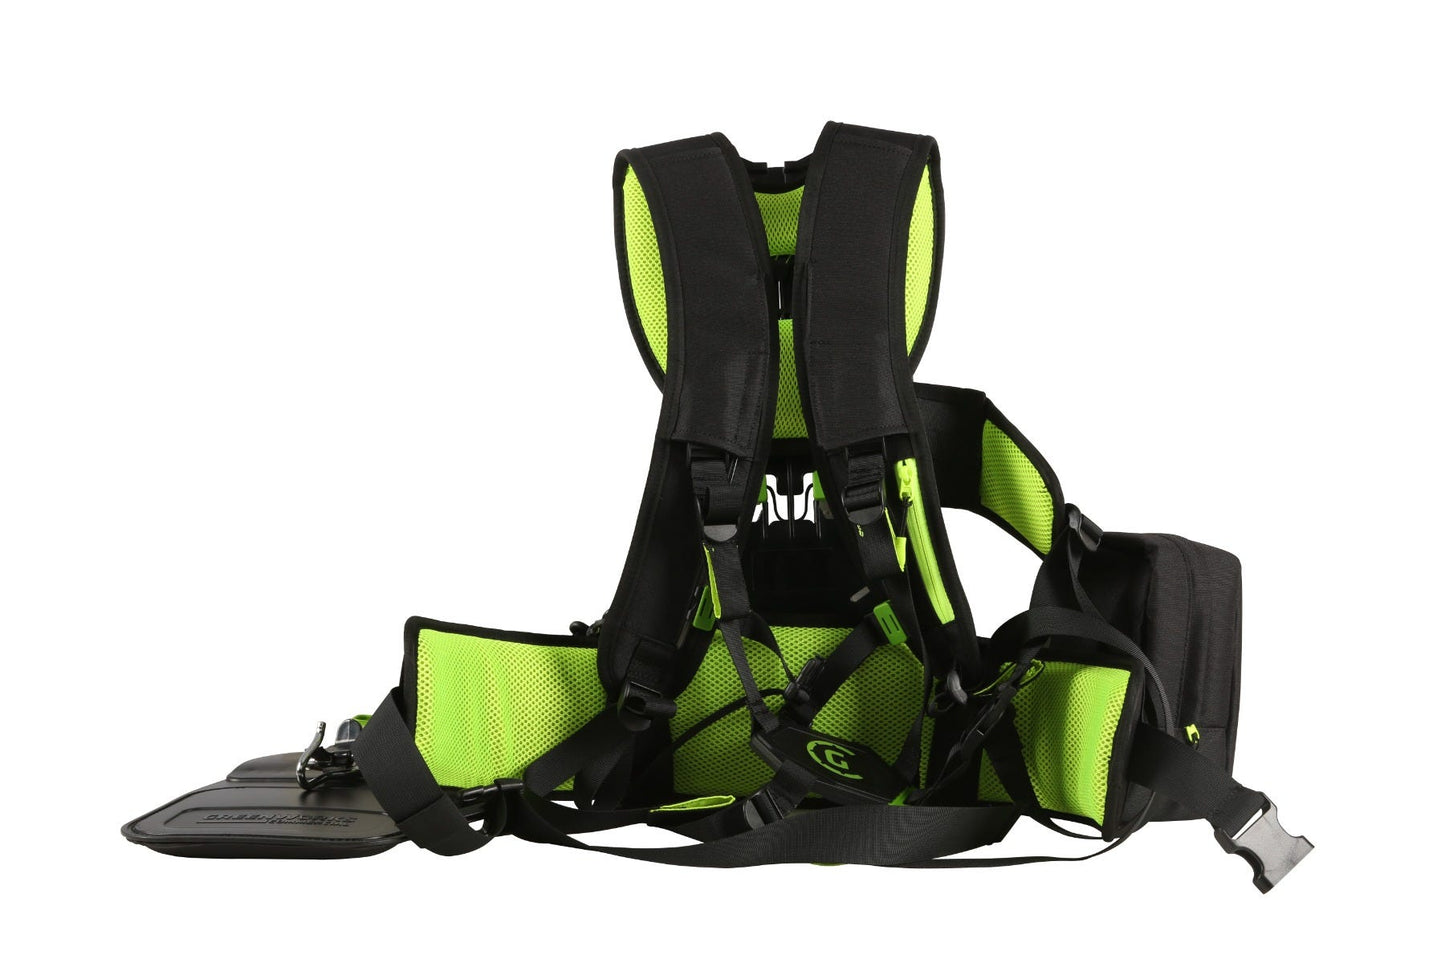 82BHX 82V Backpack Battery Harness